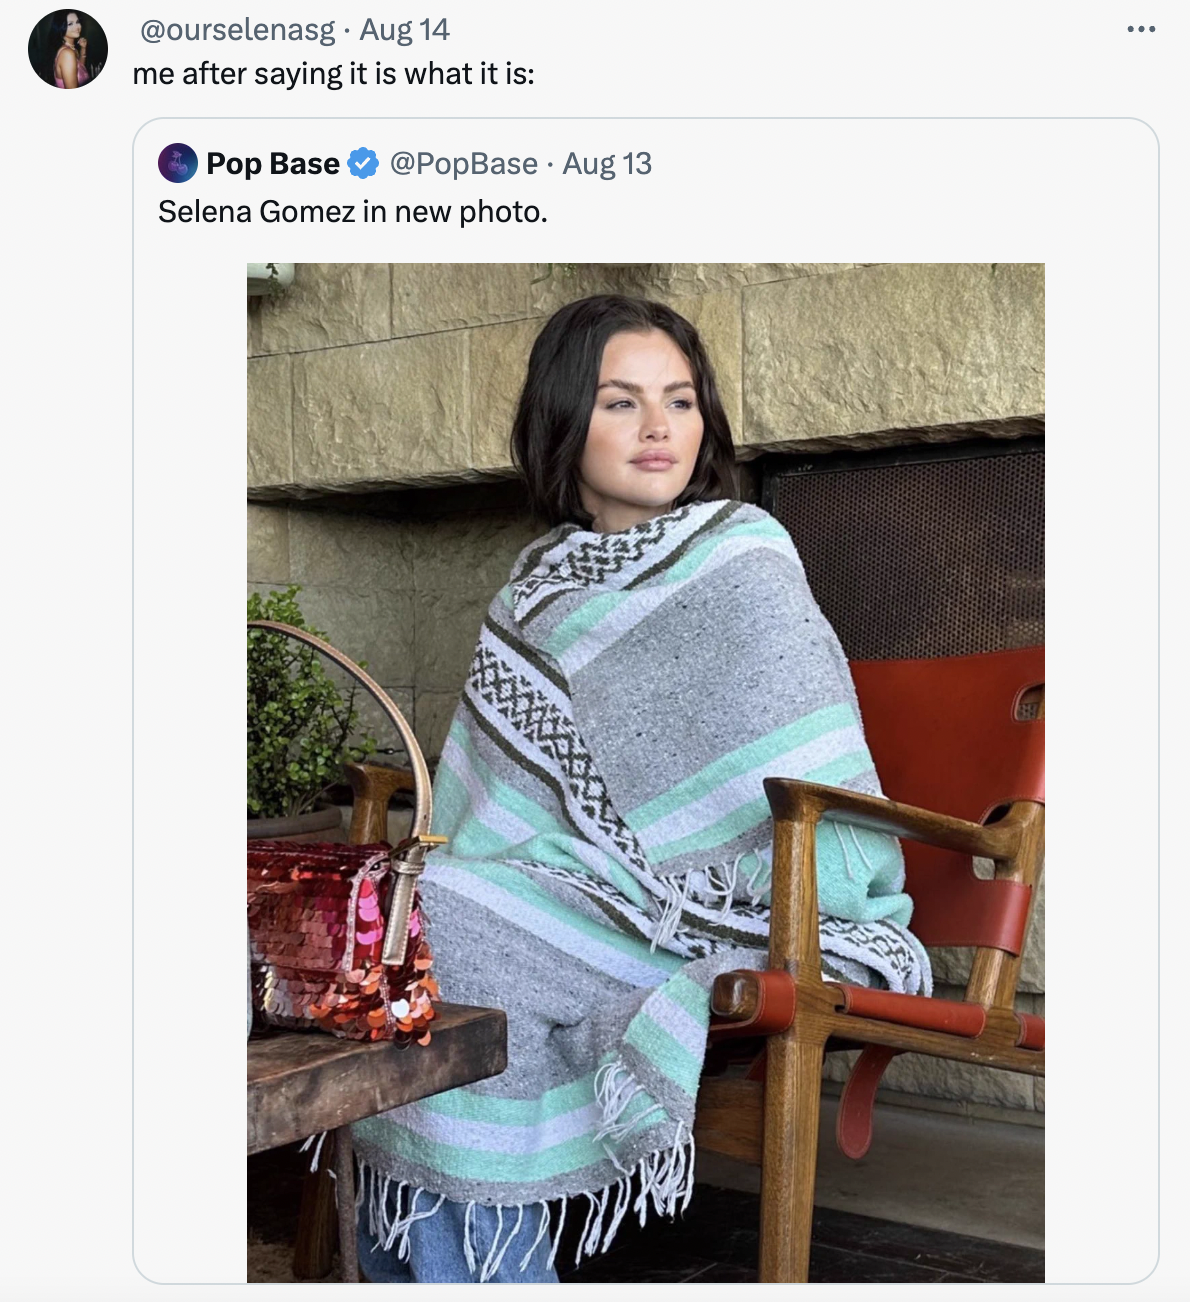 selena gomez in a blanket - stole - . Aug 14 me after saying it is what it is Pop Base Aug 13 Selena Gomez in new photo. 7744